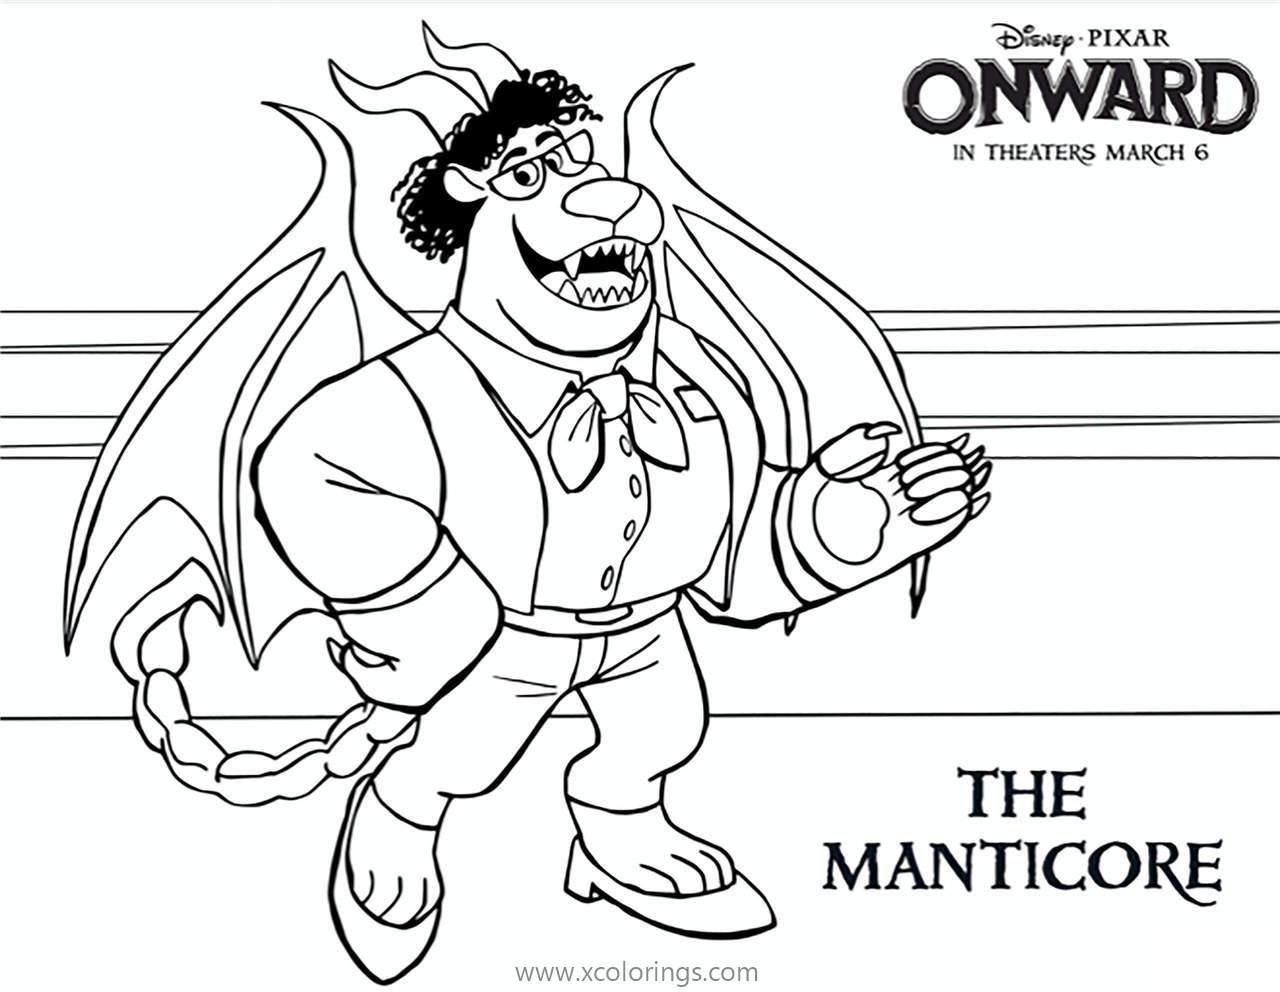 Free Onward The Manticore Coloring Pages printable